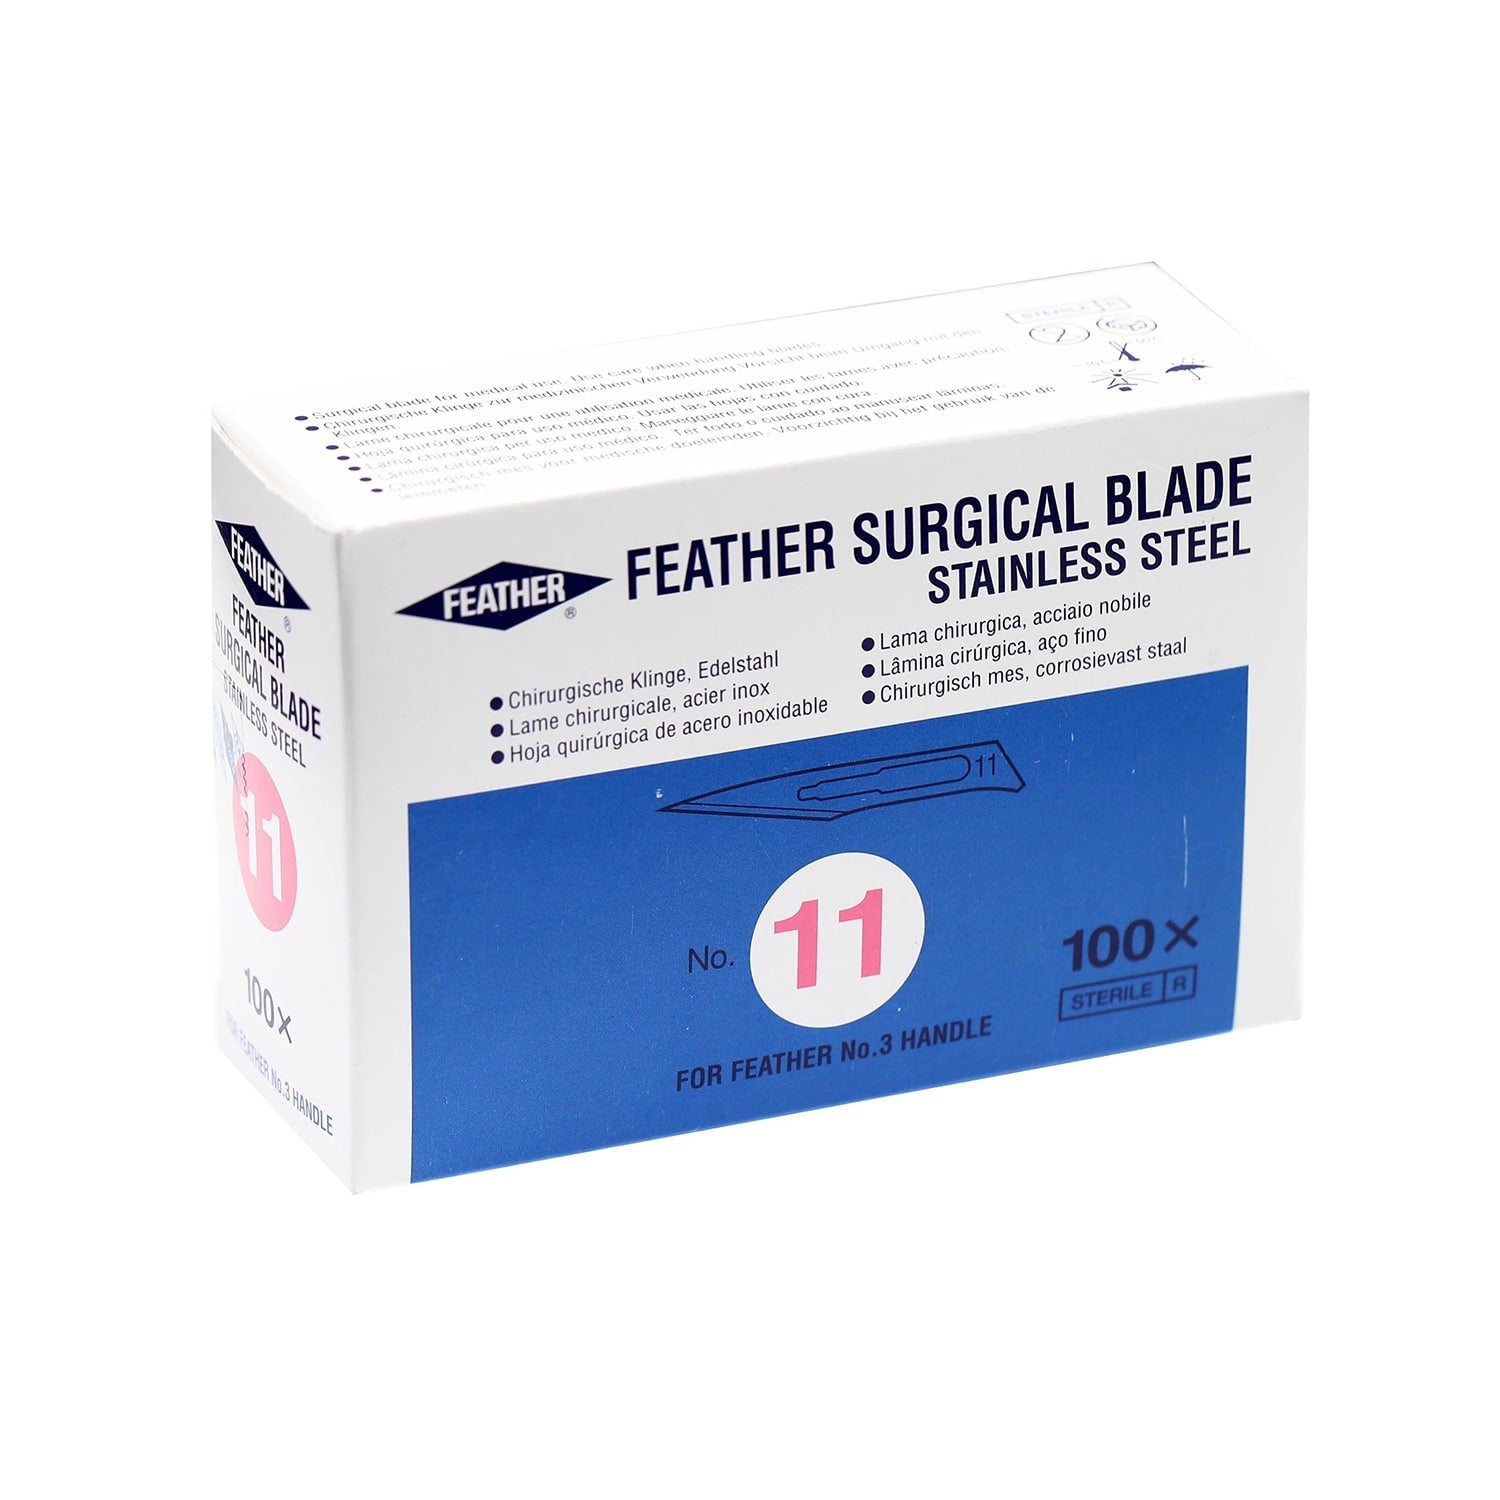 FEATHER #11 STERILE SURGICAL BLADES (100PCS/BOX)